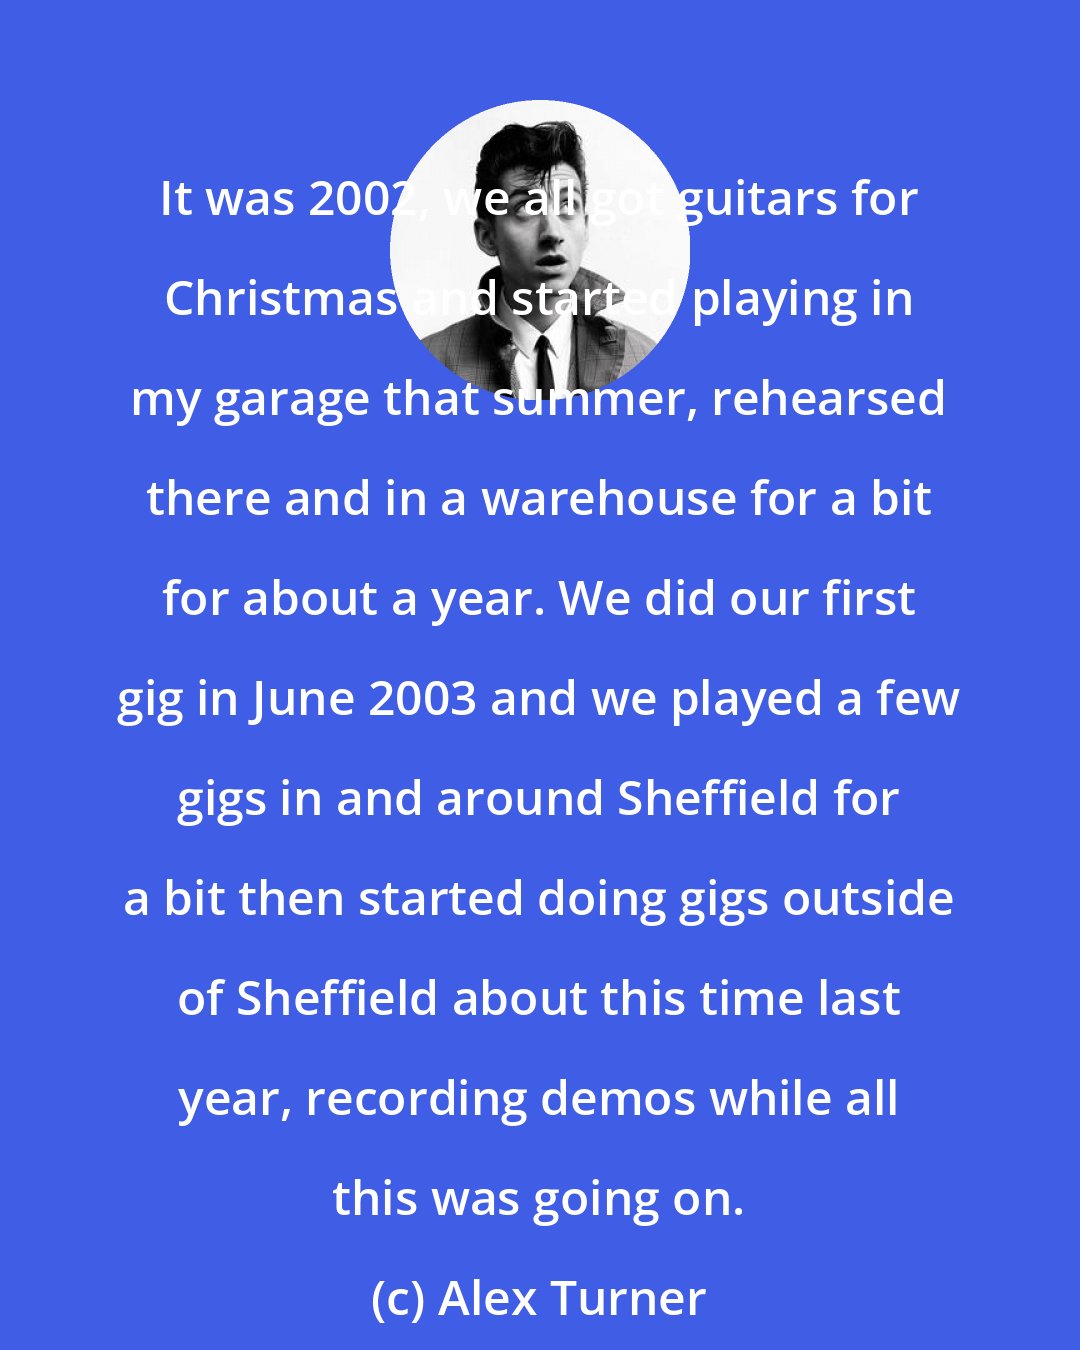 Alex Turner: It was 2002, we all got guitars for Christmas and started playing in my garage that summer, rehearsed there and in a warehouse for a bit for about a year. We did our first gig in June 2003 and we played a few gigs in and around Sheffield for a bit then started doing gigs outside of Sheffield about this time last year, recording demos while all this was going on.